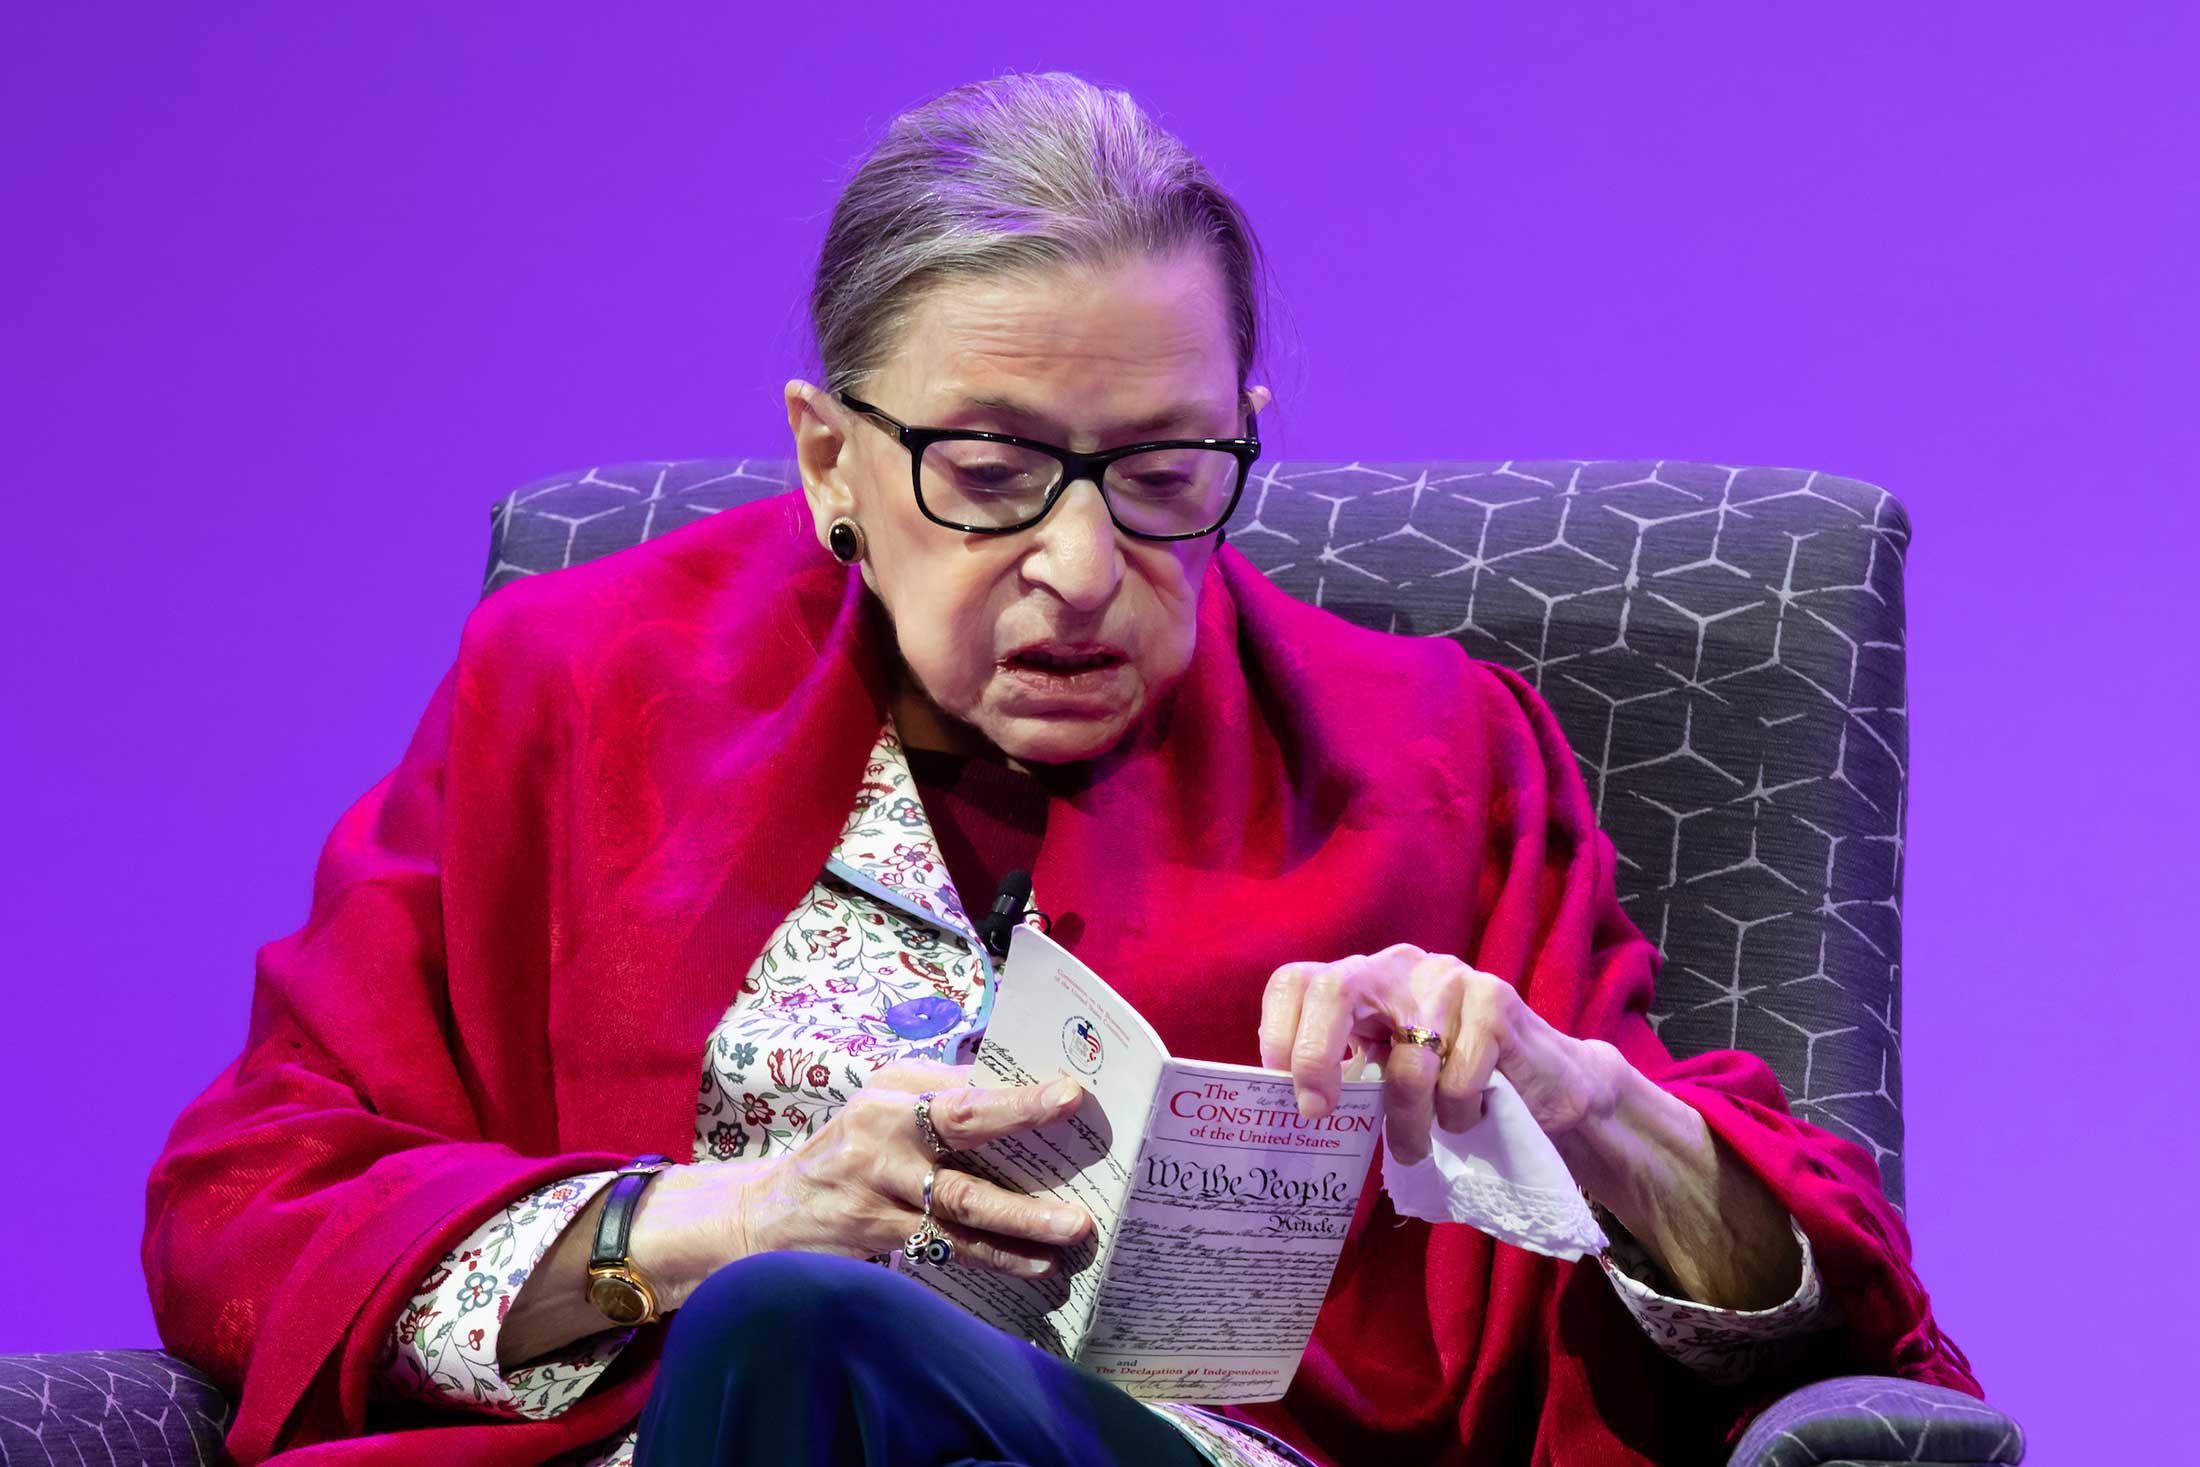 Justice Ginsburg reading from the Constitution